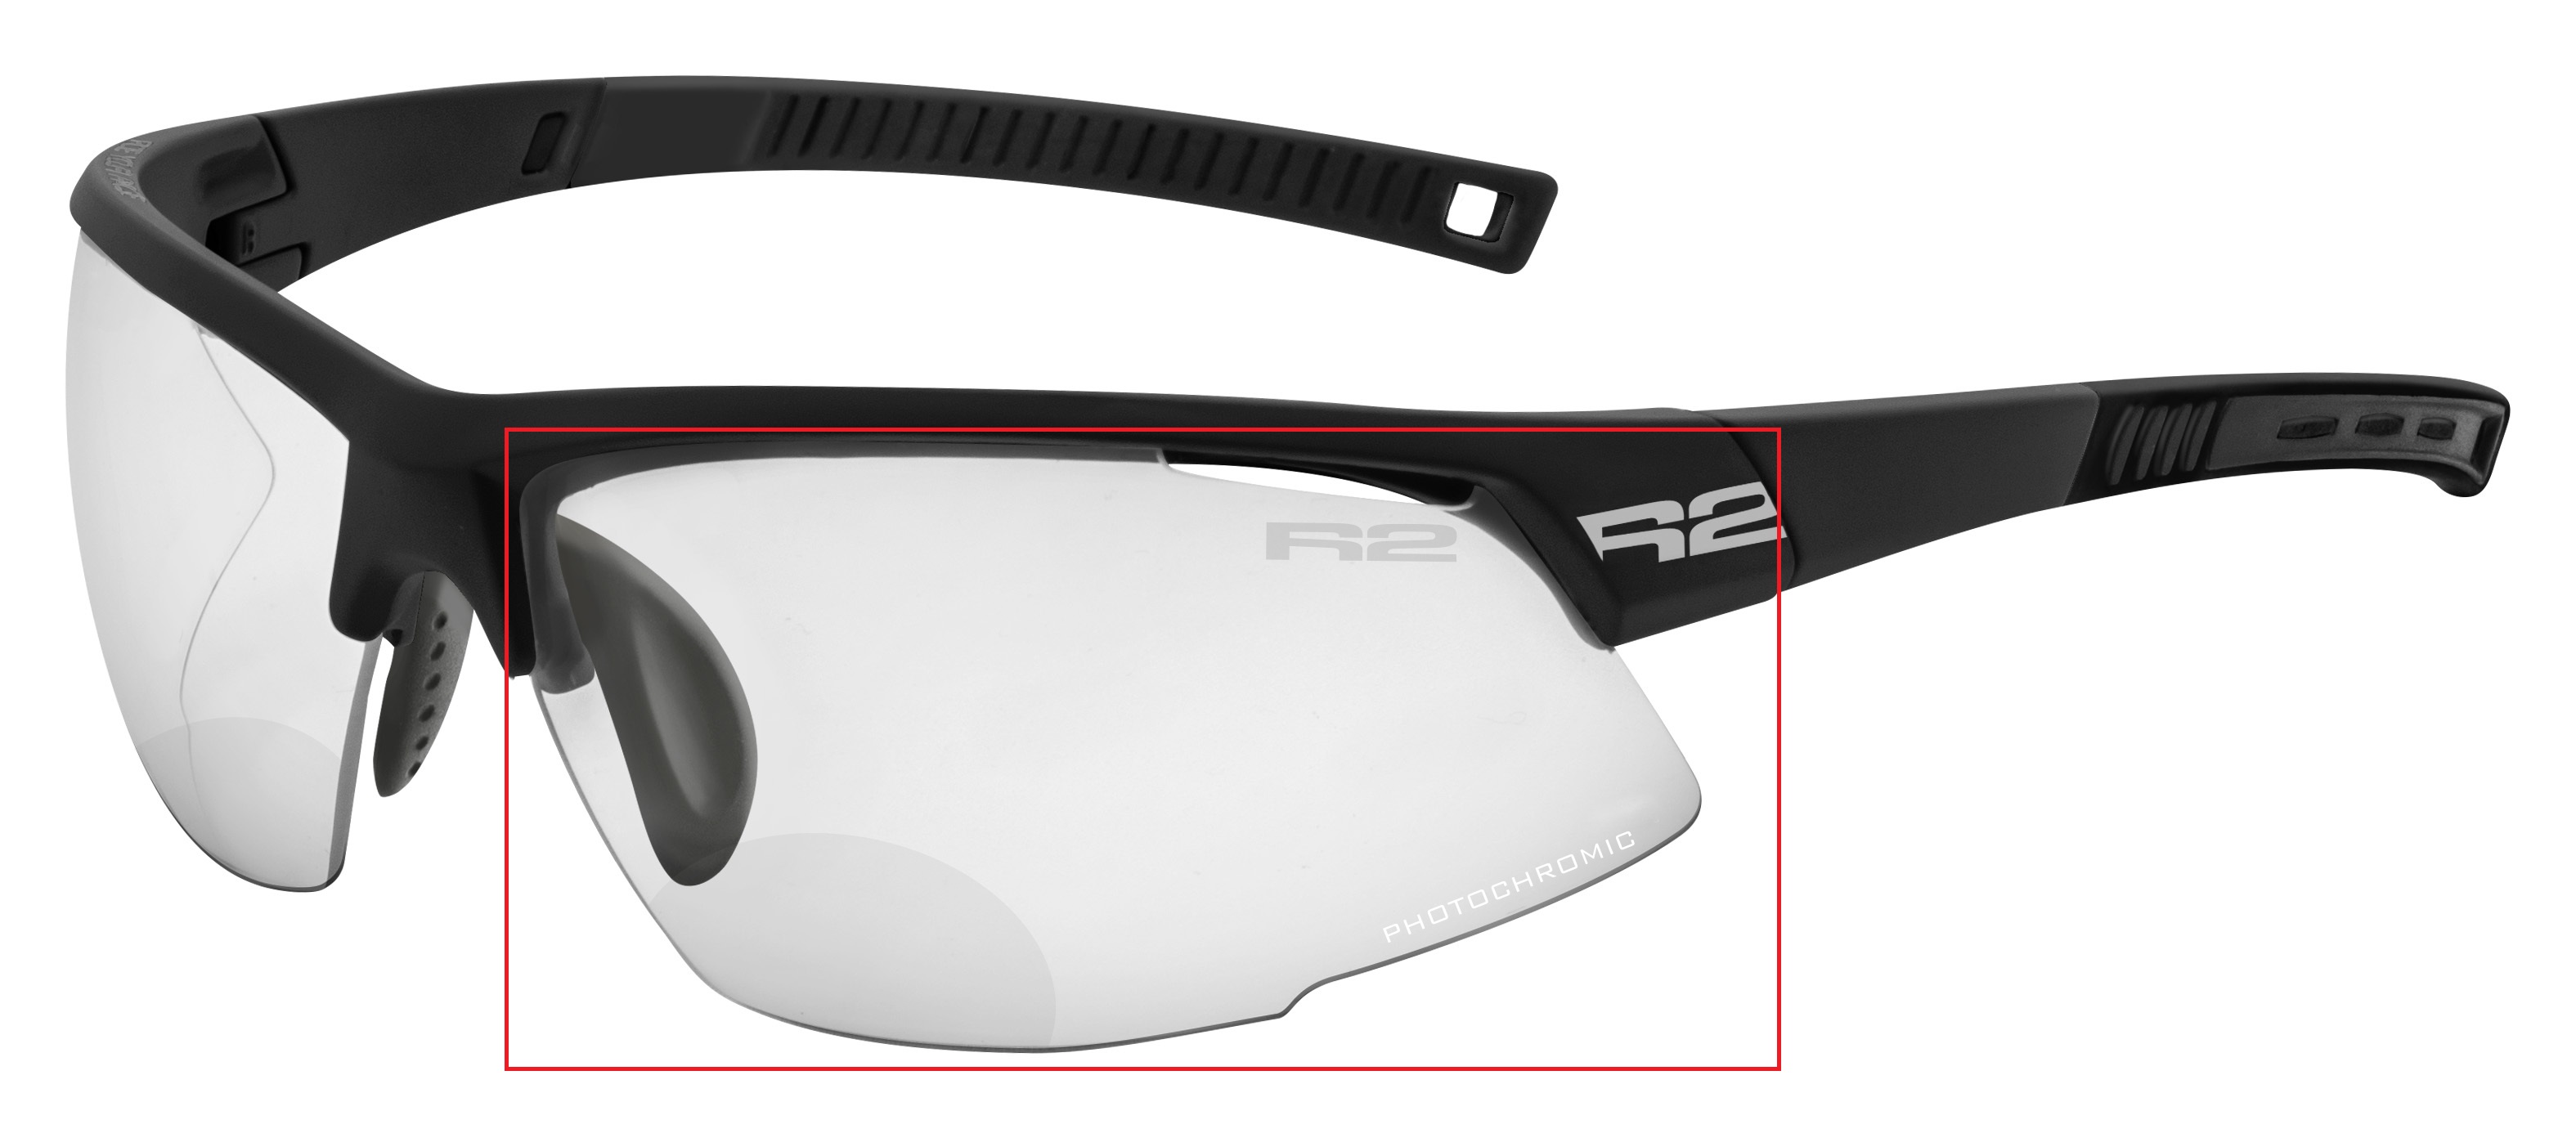 +2.0 Diopter Bifocal Replacement Lenses for R2 Racer AT063 Photochromic